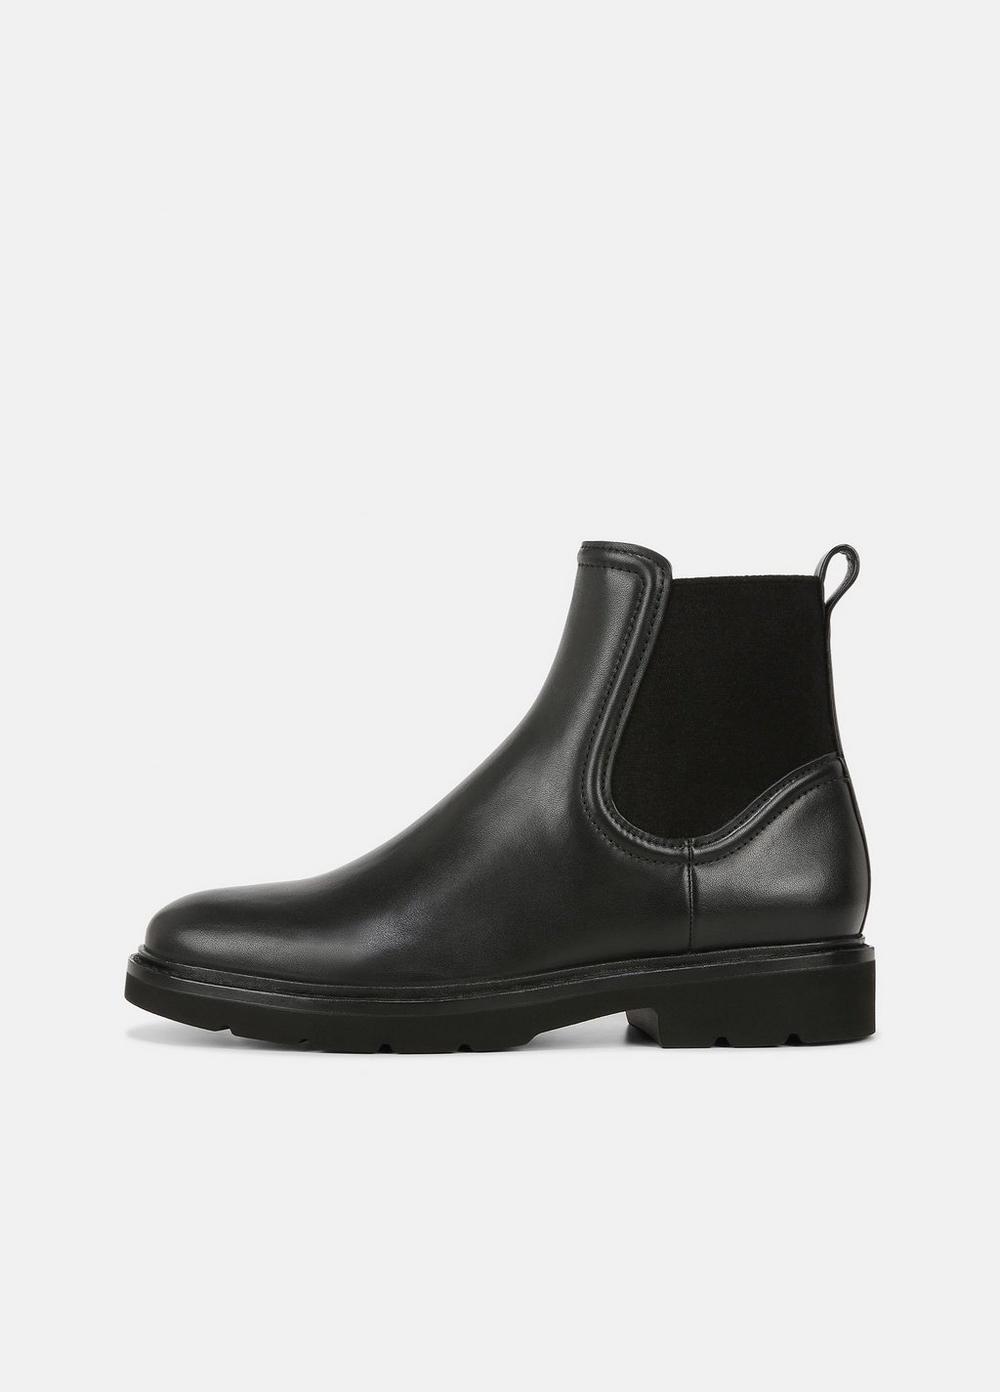 Rue Leather Lug Boot in Boots | Vince